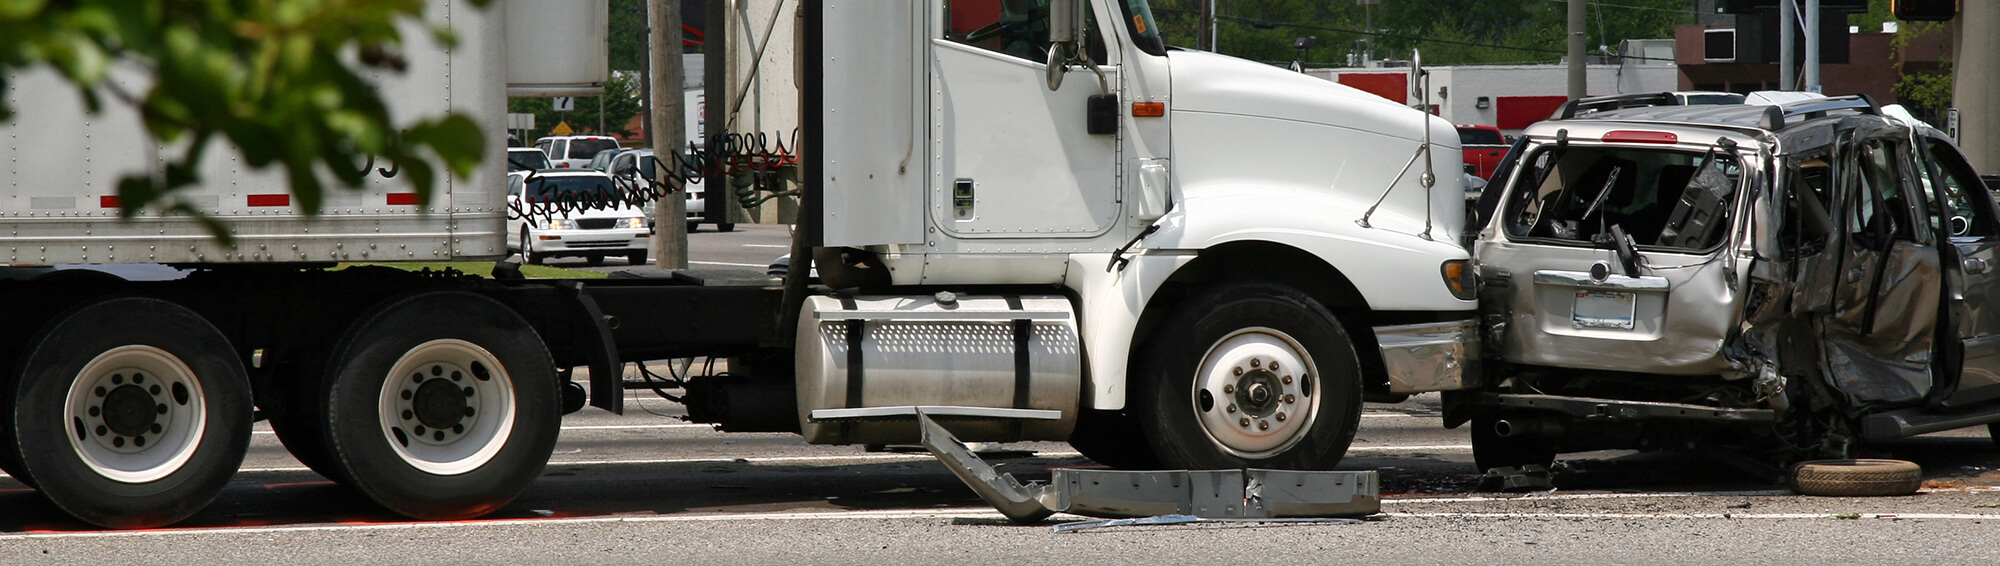 Trucking Industry Lawyers Know Our Reputation